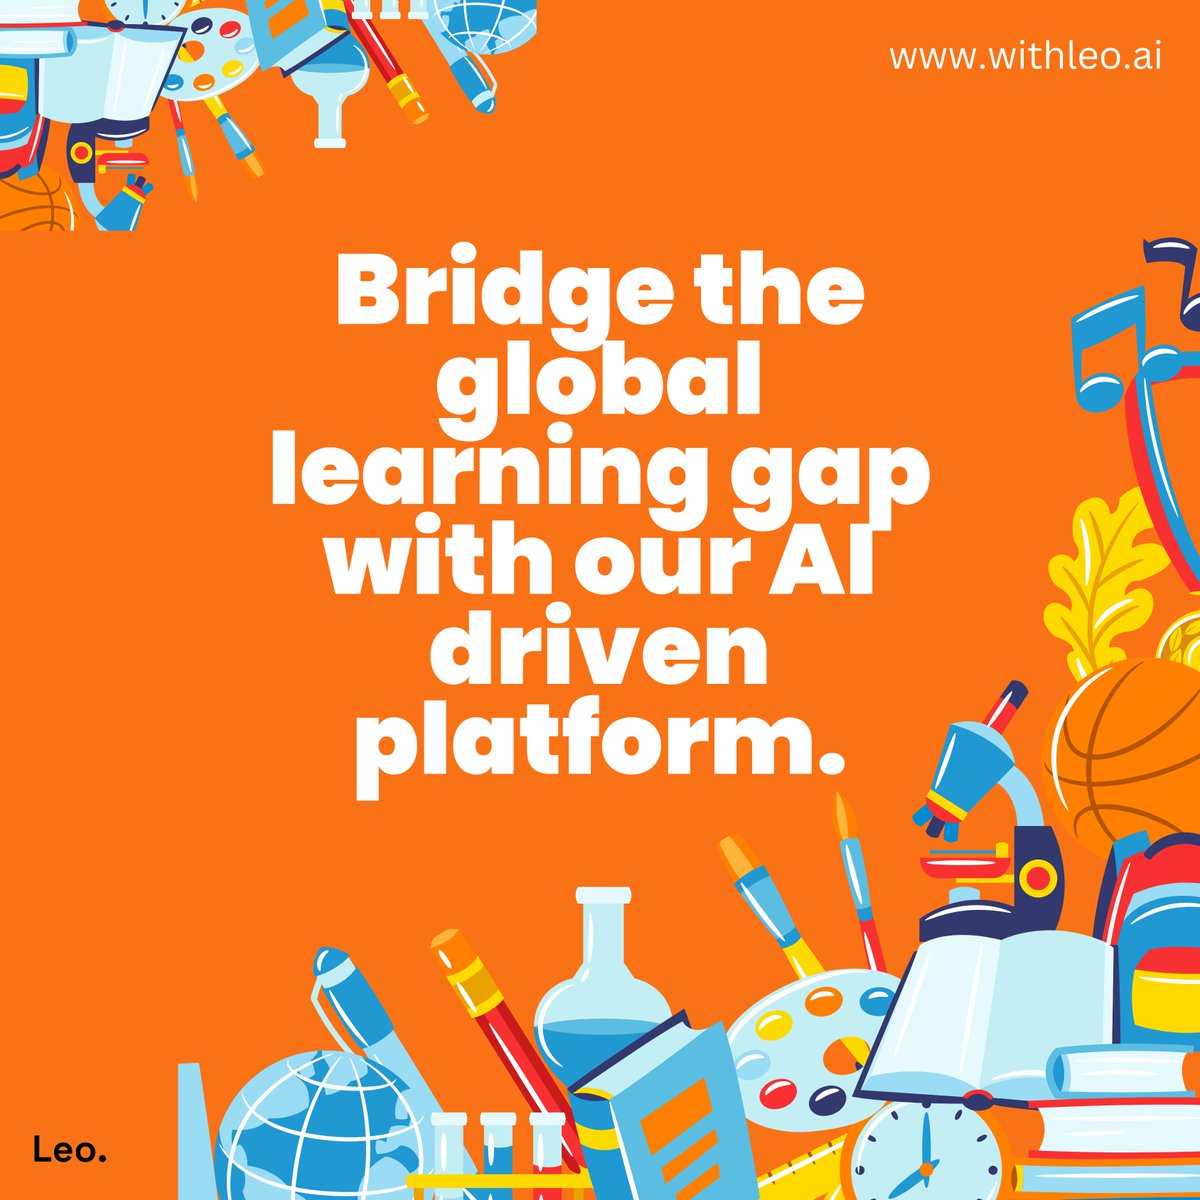 Bridge the global #education gap with Leo 🌍—an #AI-driven platform making quality learning accessible to all, even in resource-limited settings. Discover how Leo supports your initiatives at withleo.ai #edtech #teaching #AIinEducation #TeacherTools #EducationalAI